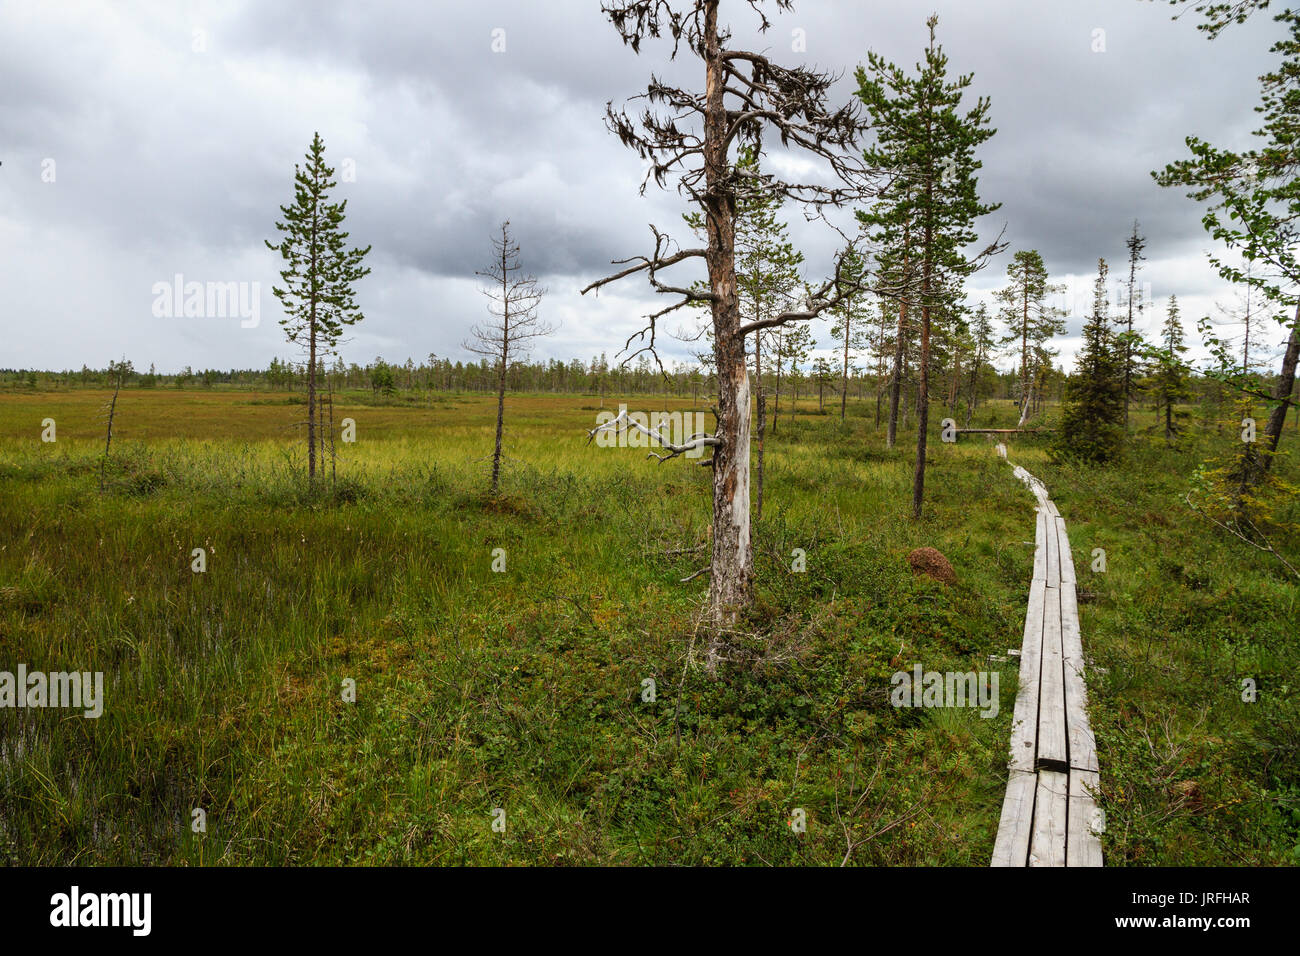 The Duckboard path over the swamp in Muddus National Park, Lapland Sweden Stock Photo